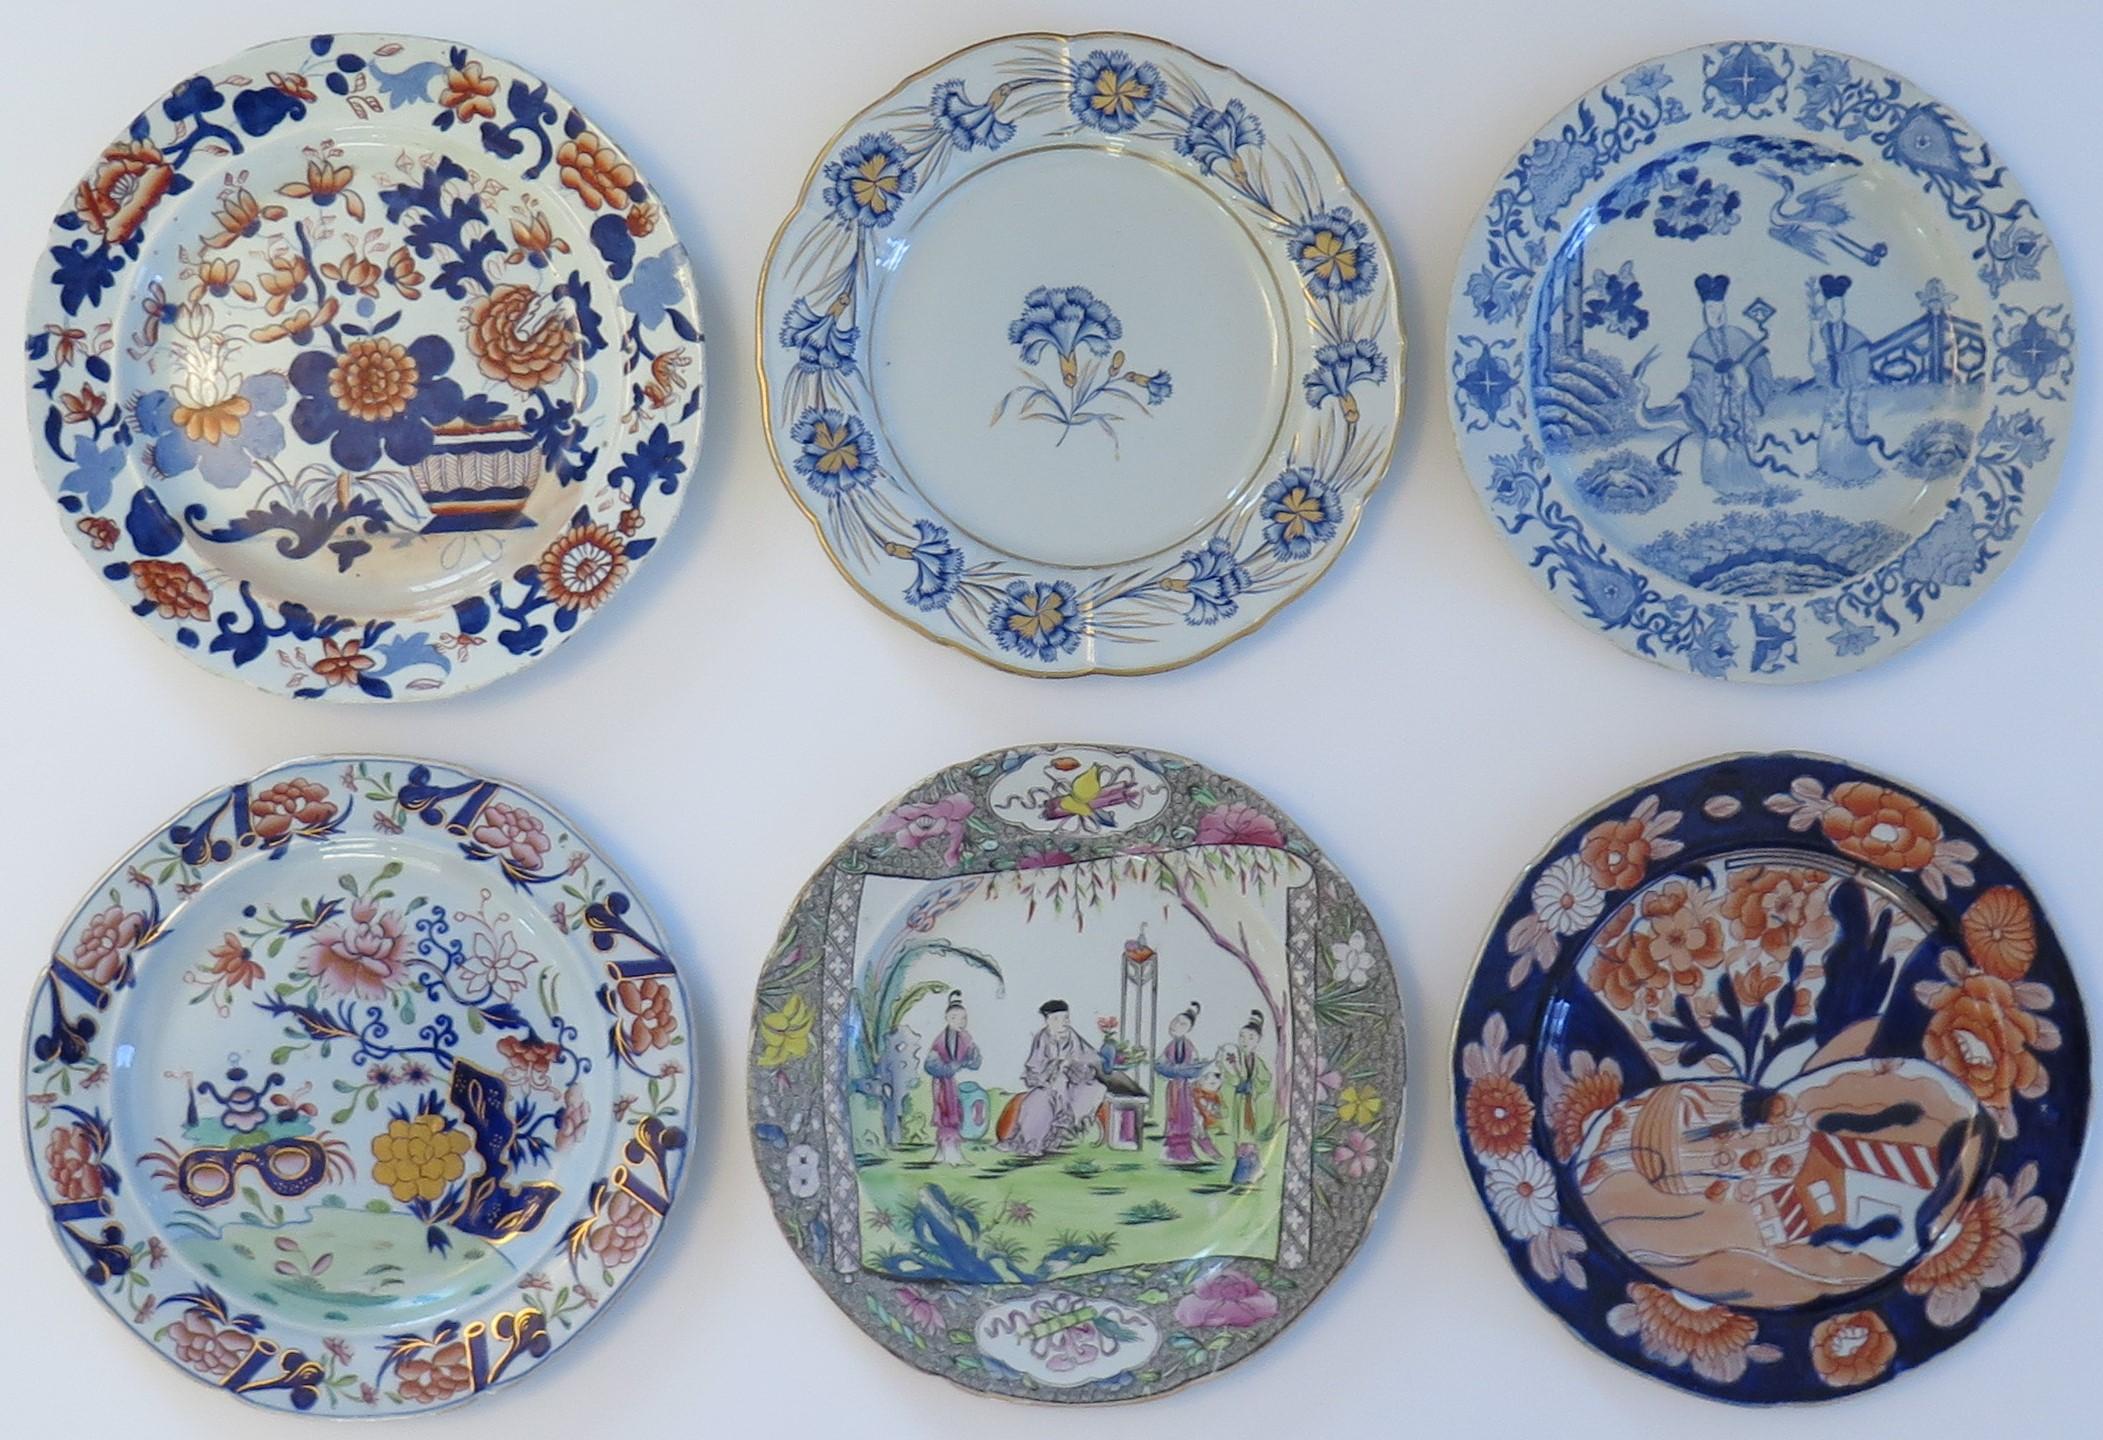 This is a harlequin set of six Mason's ironstone dinner plates, all dating to the earliest period between 1813 and 1820. 

All the plates are the same nominal size and shape, but have different patterns, some being rare; 

Top row left: Japan